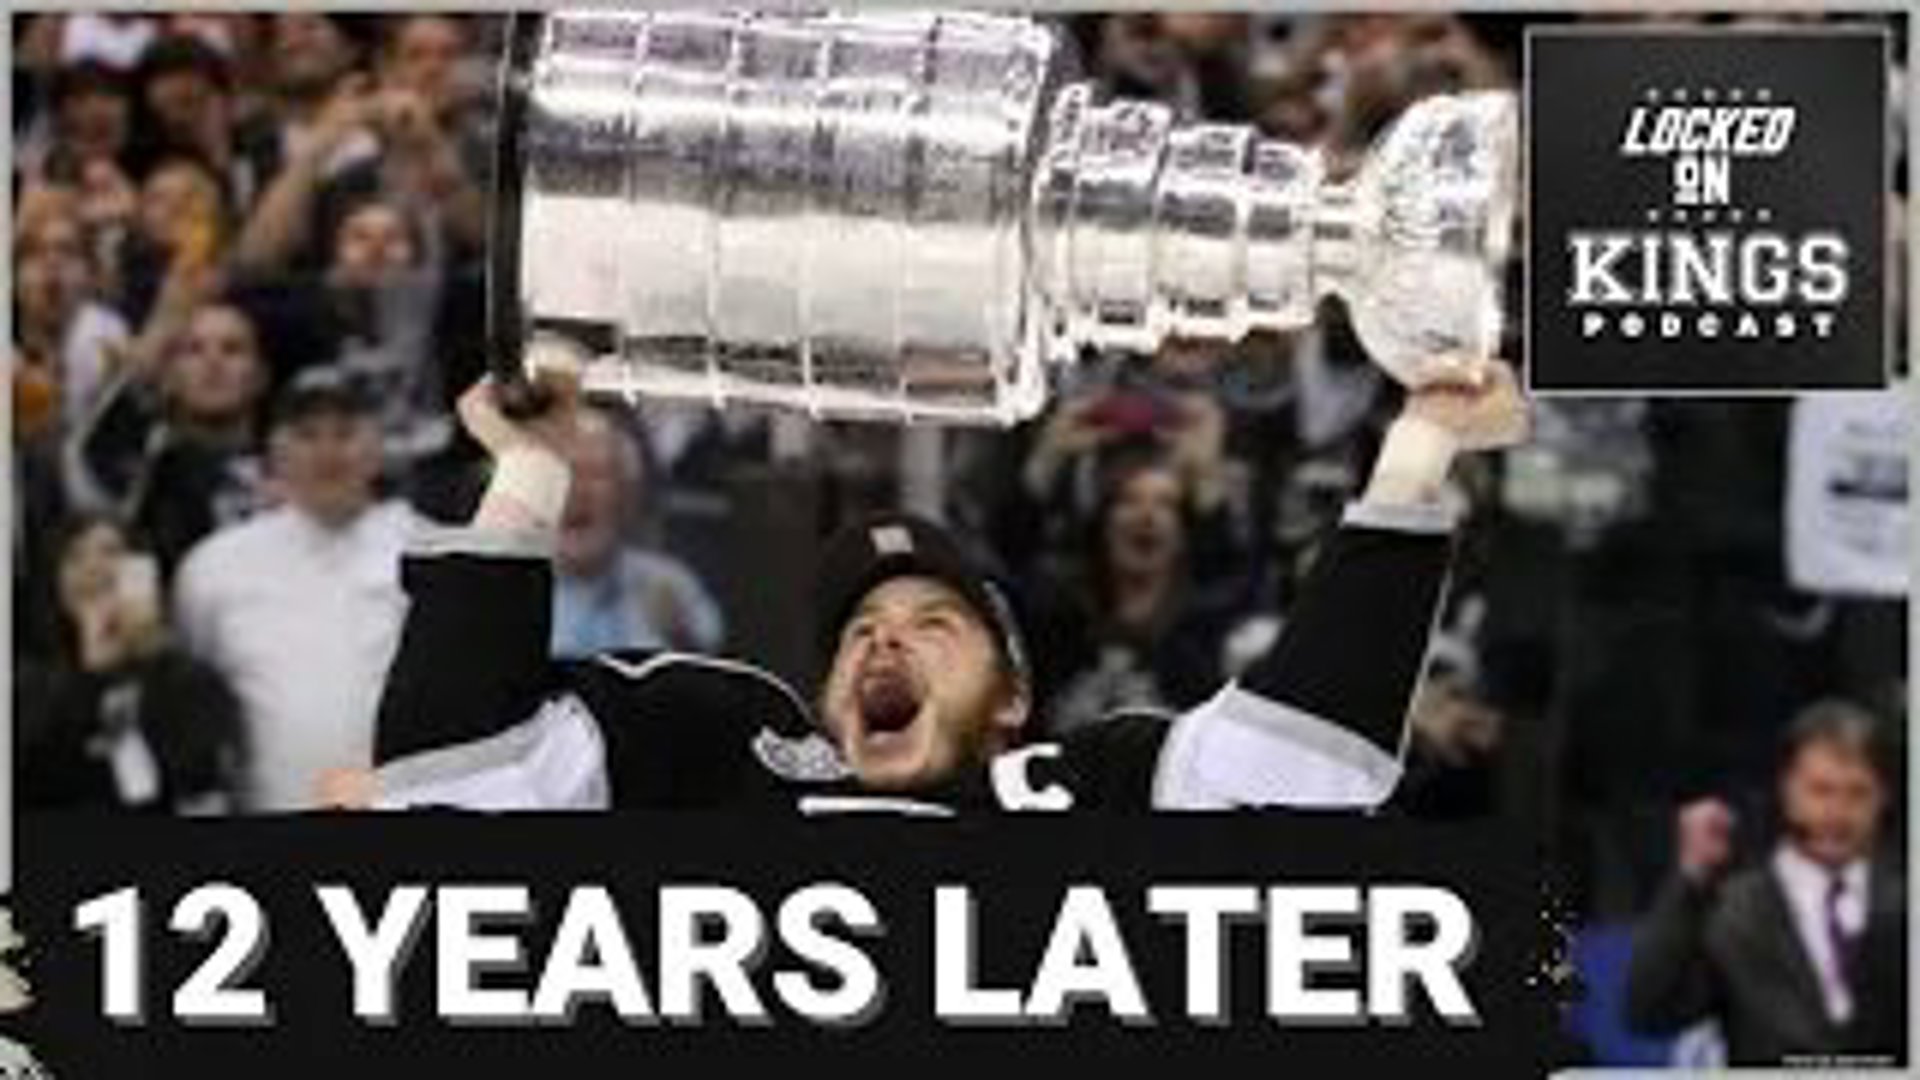 June 11 is the 12 year anniversary of the LA Kings winning their first Stanley Cup title.  We celebrate and look back at the that special and historic run on LOK!